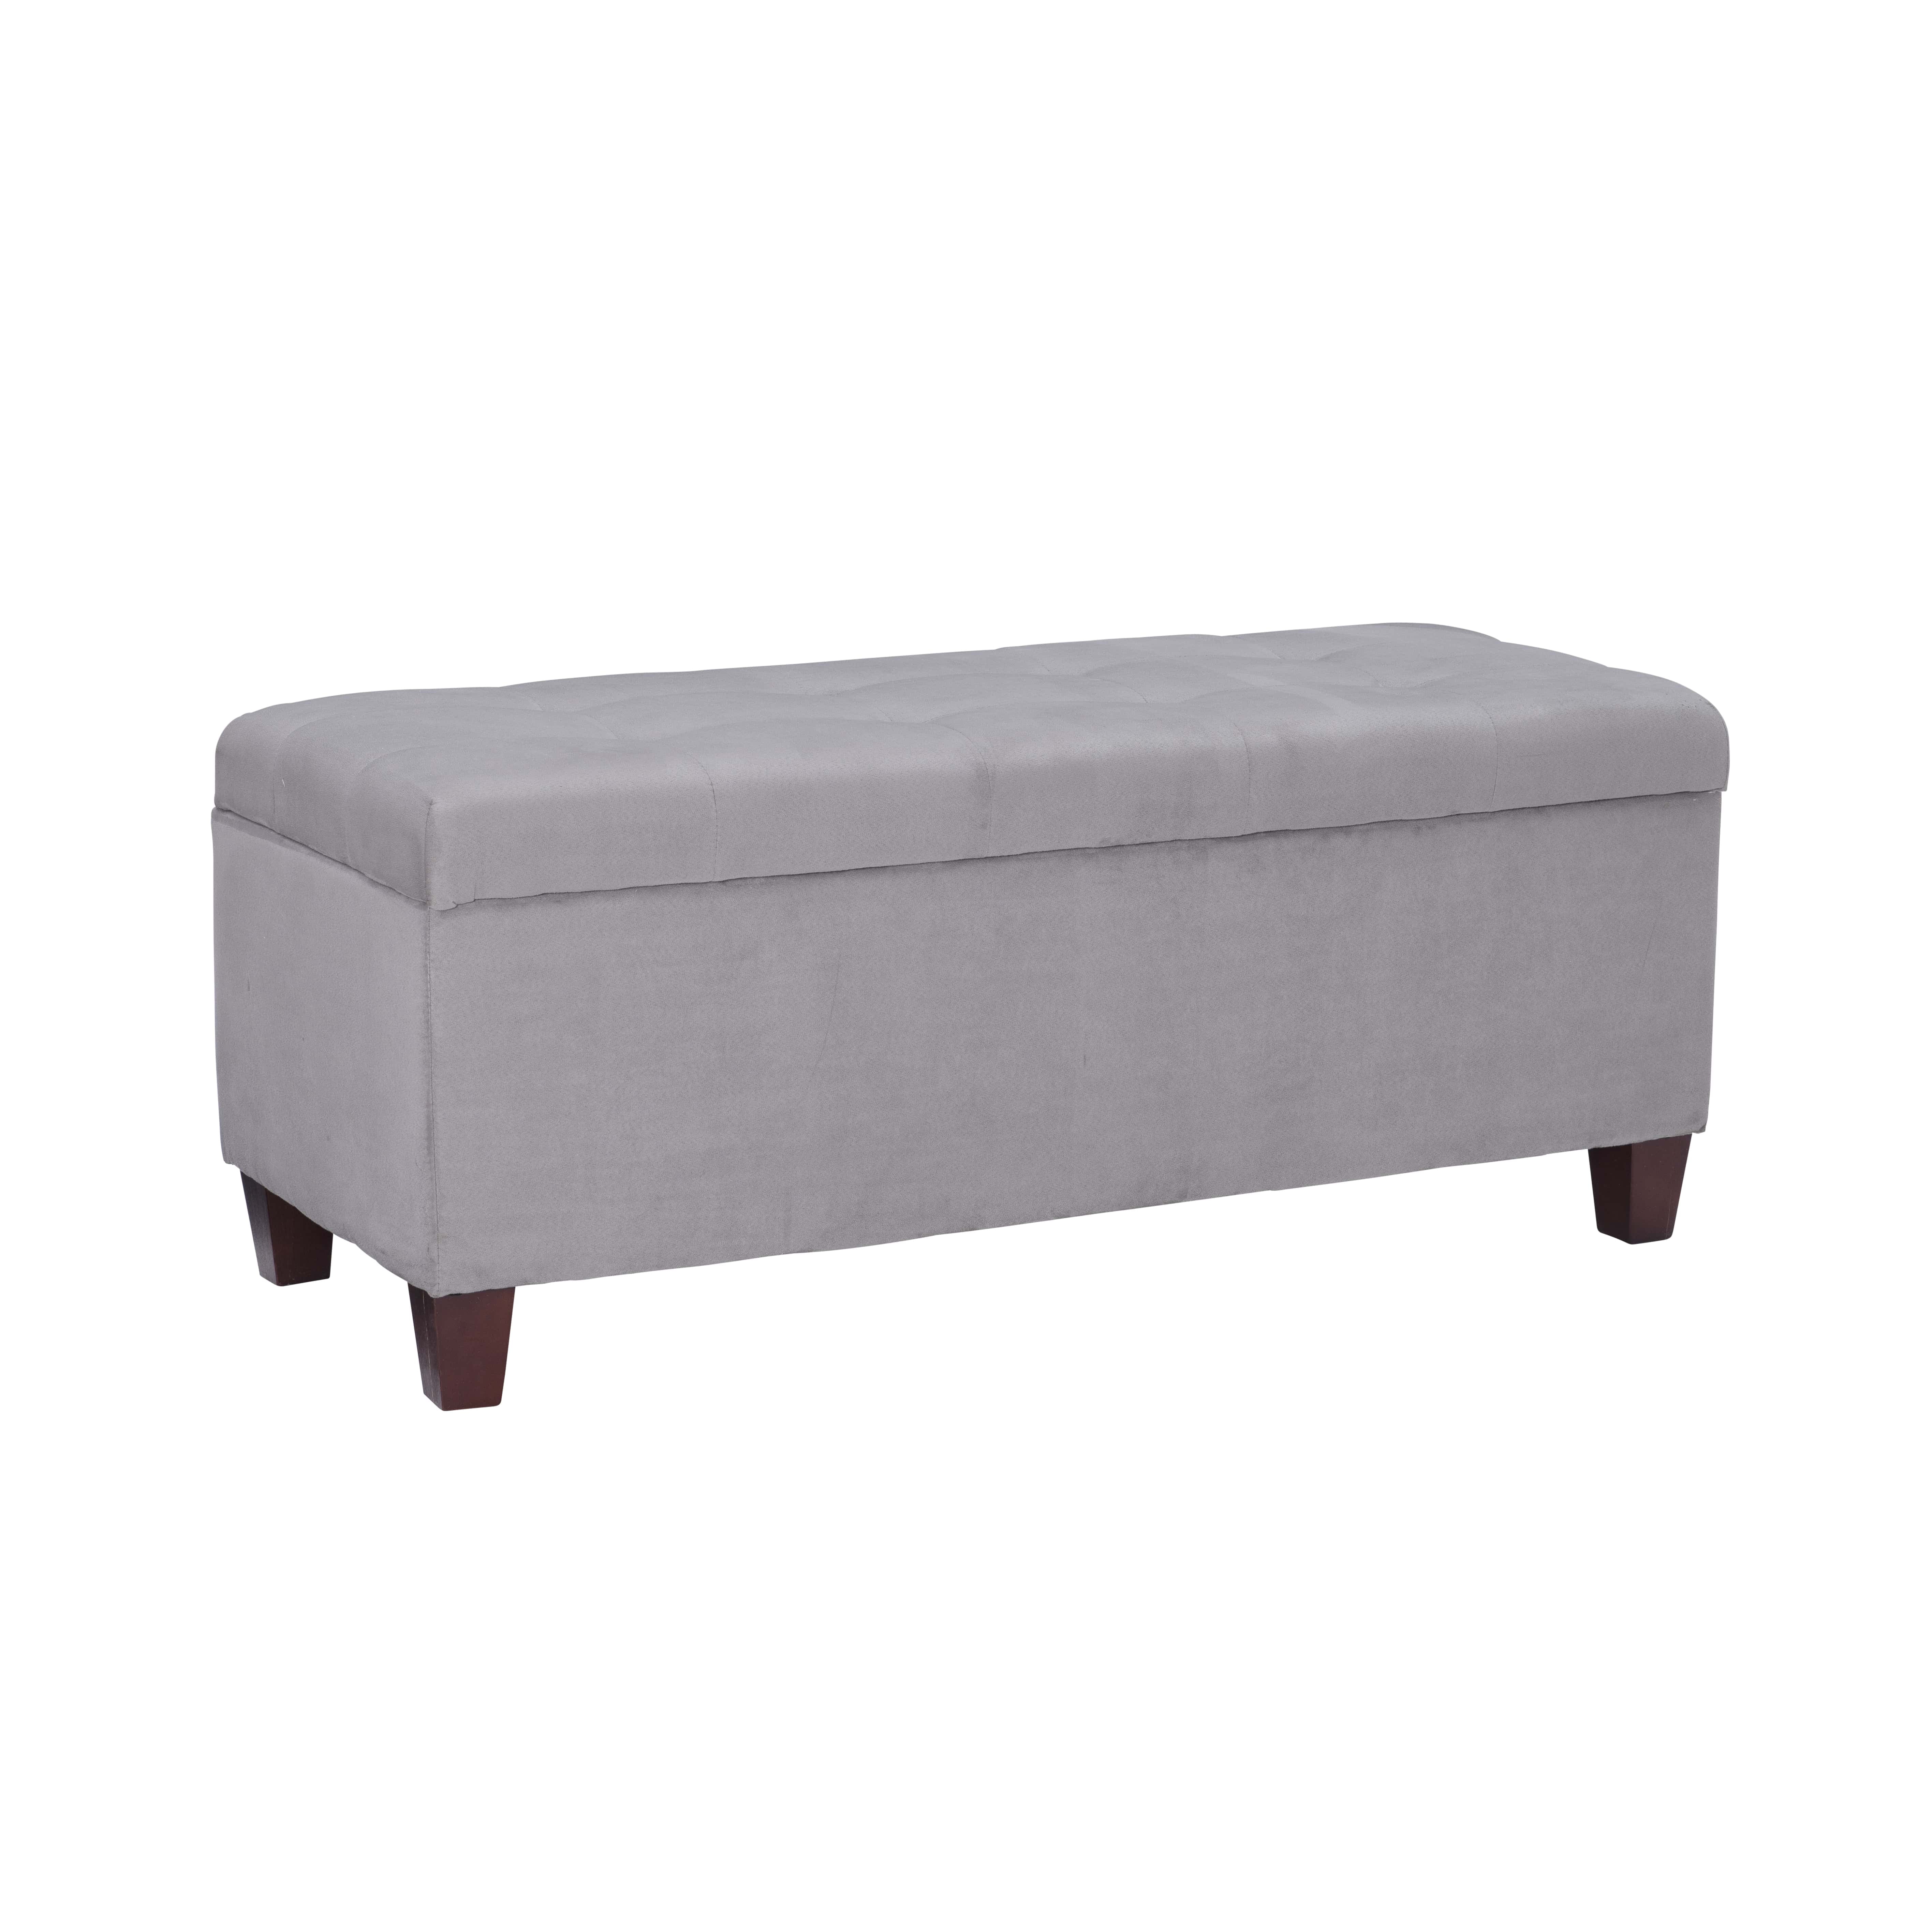 Luxurious Quality PU Leather Ottoman With Tufted Button Lid Storage Seat Chair 